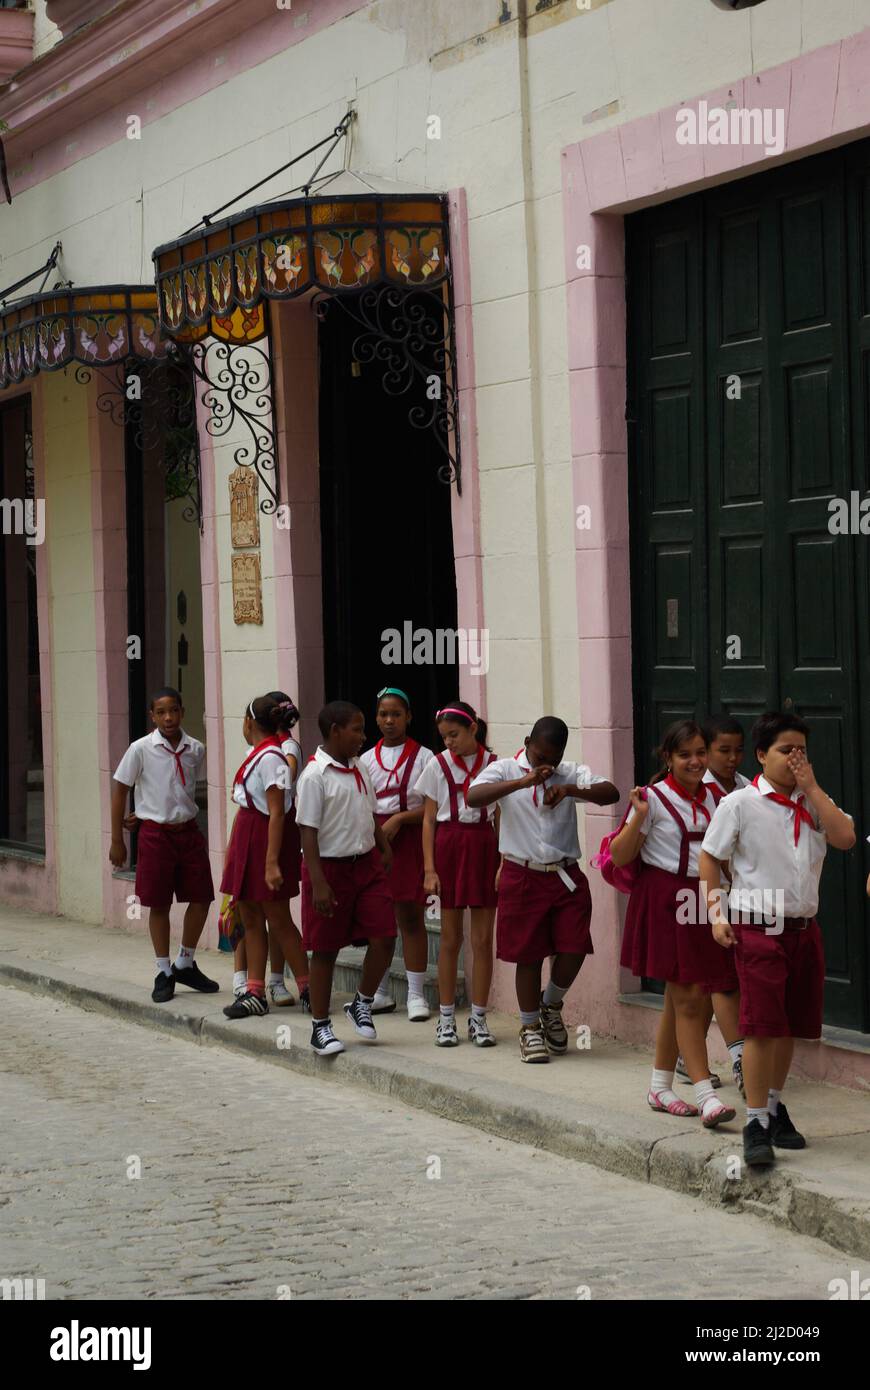 Havana, Cuba, May 31, 2010, traditional dress of schoolchildren in the country. Stock Photo